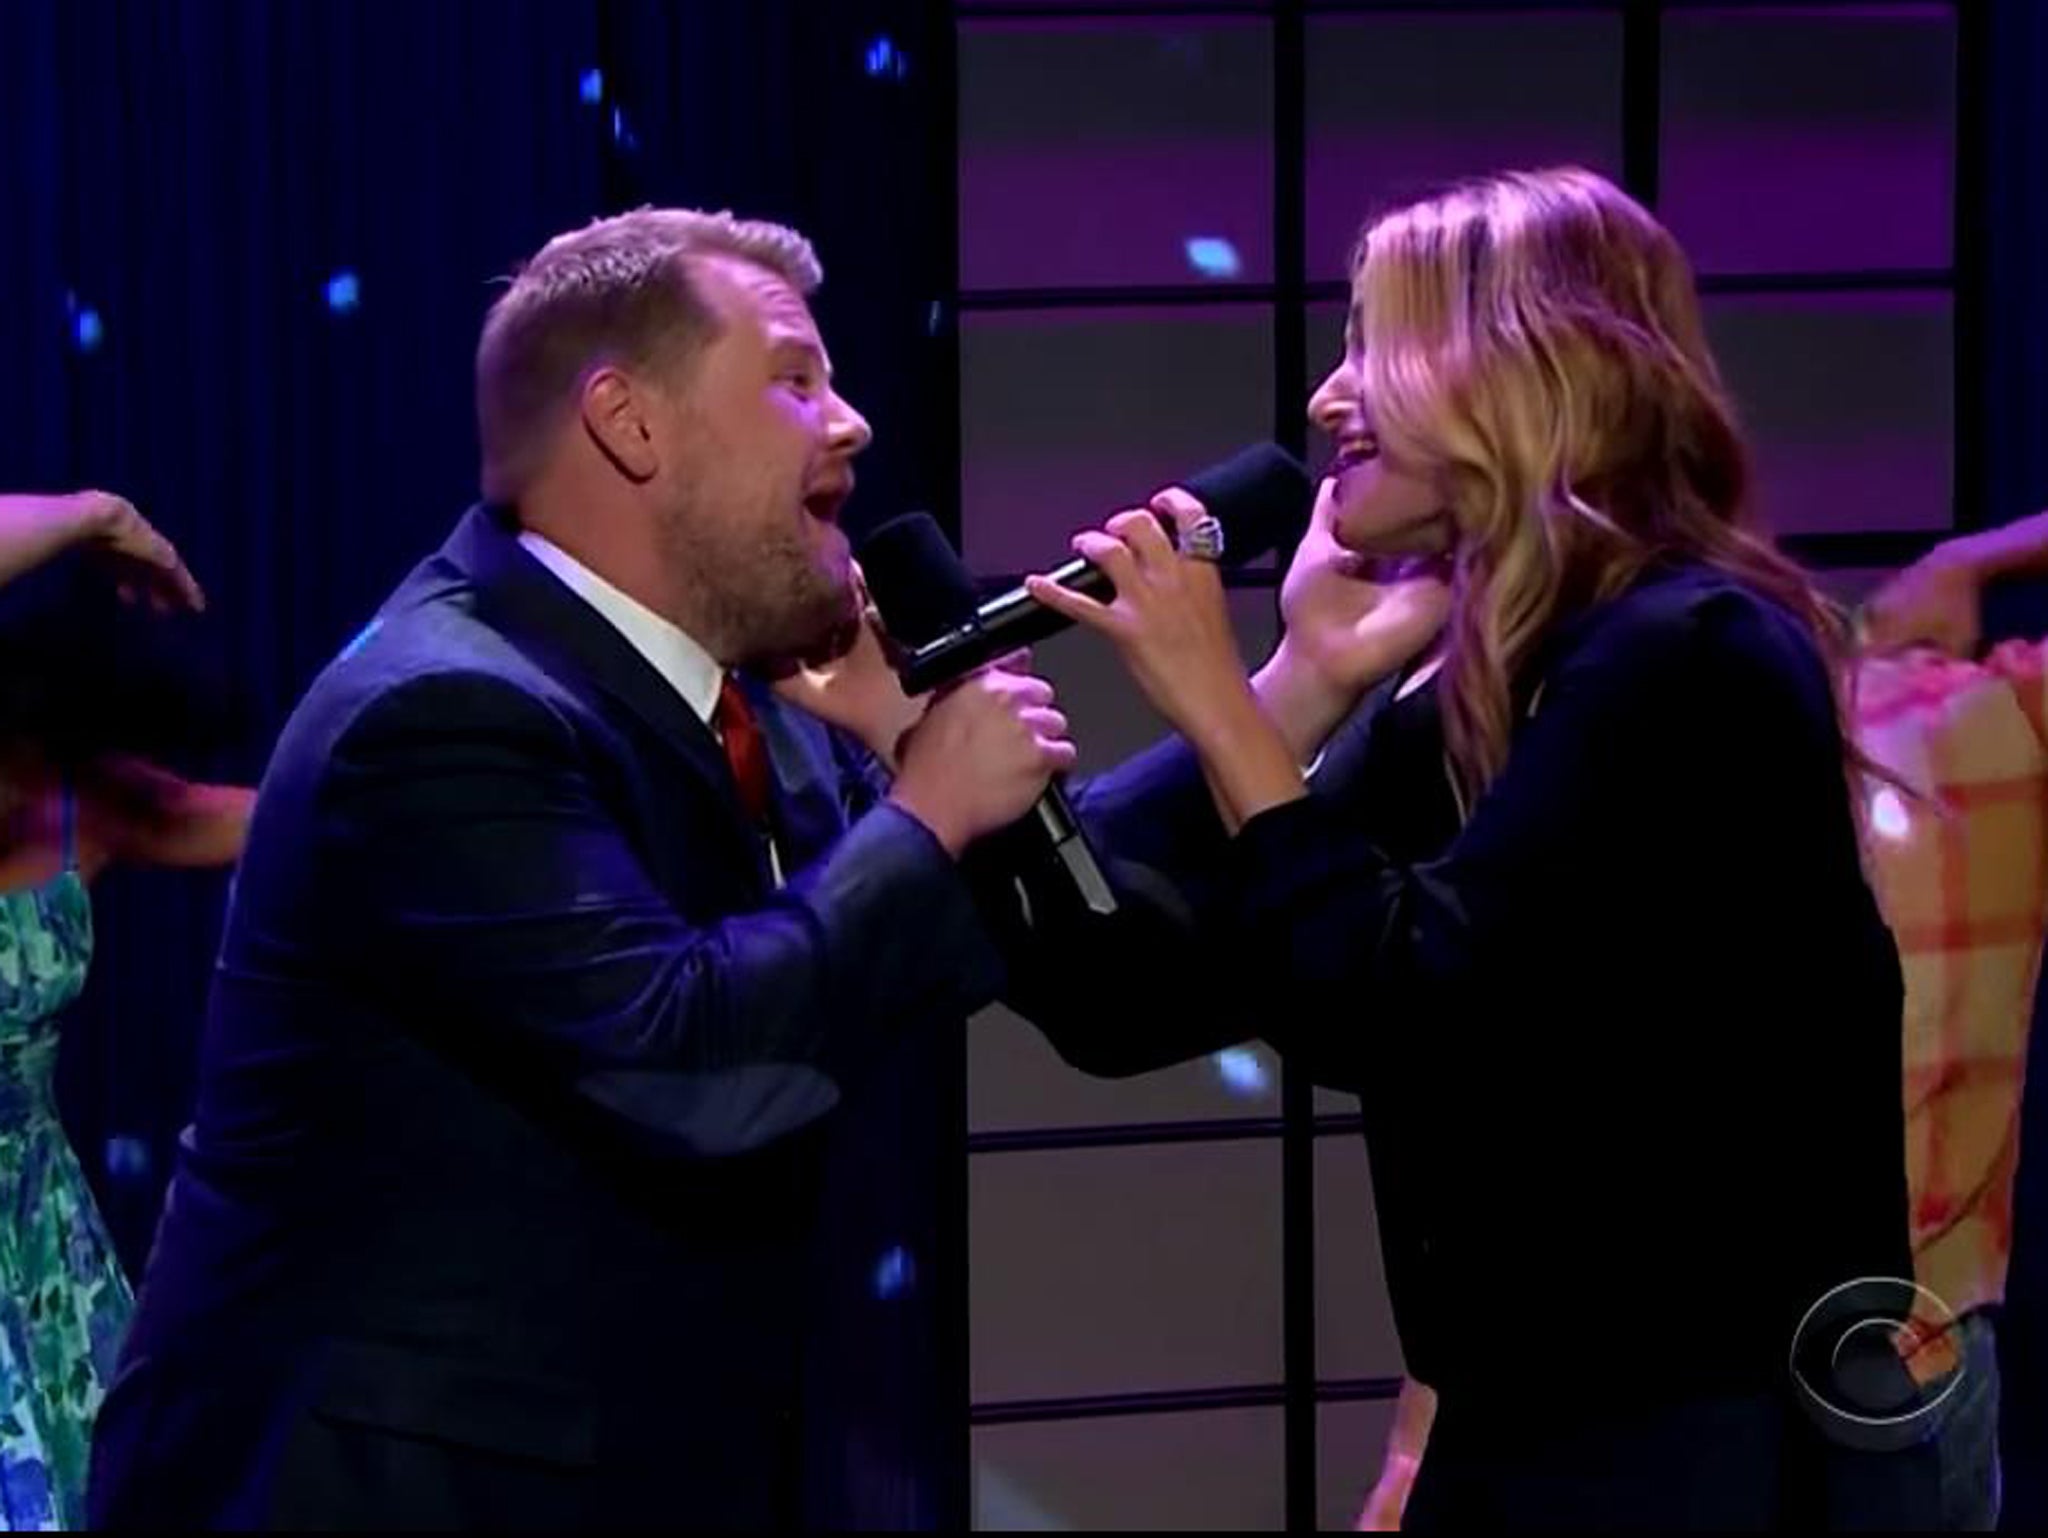 James Corden and Idina Menzel sing 'I've Had the Time of My Life' on The Late Late Show